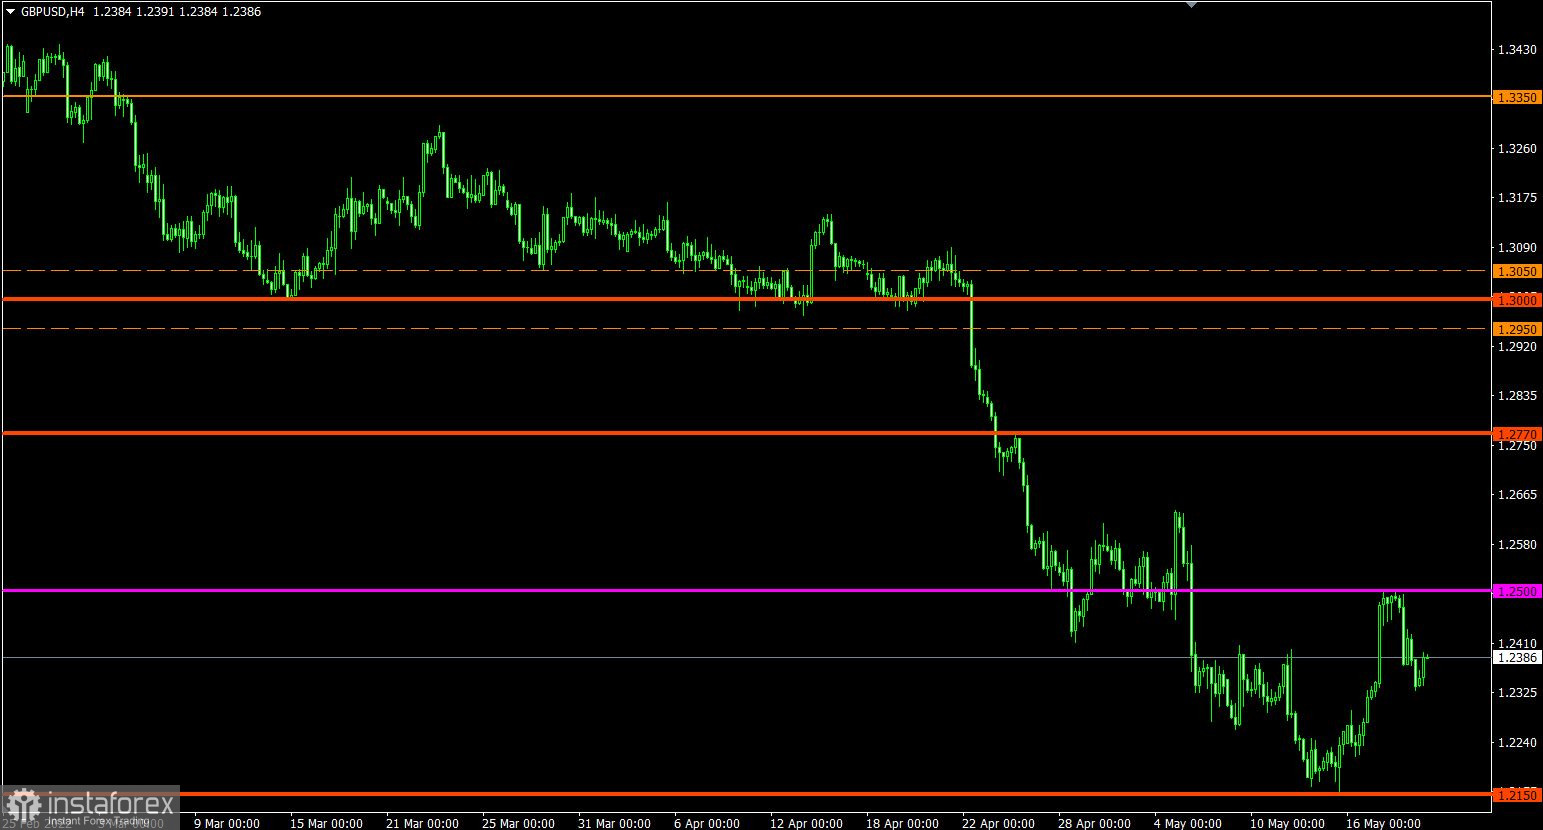 Trading plan for EUR/USD and GBP/USD on May 19, 2022